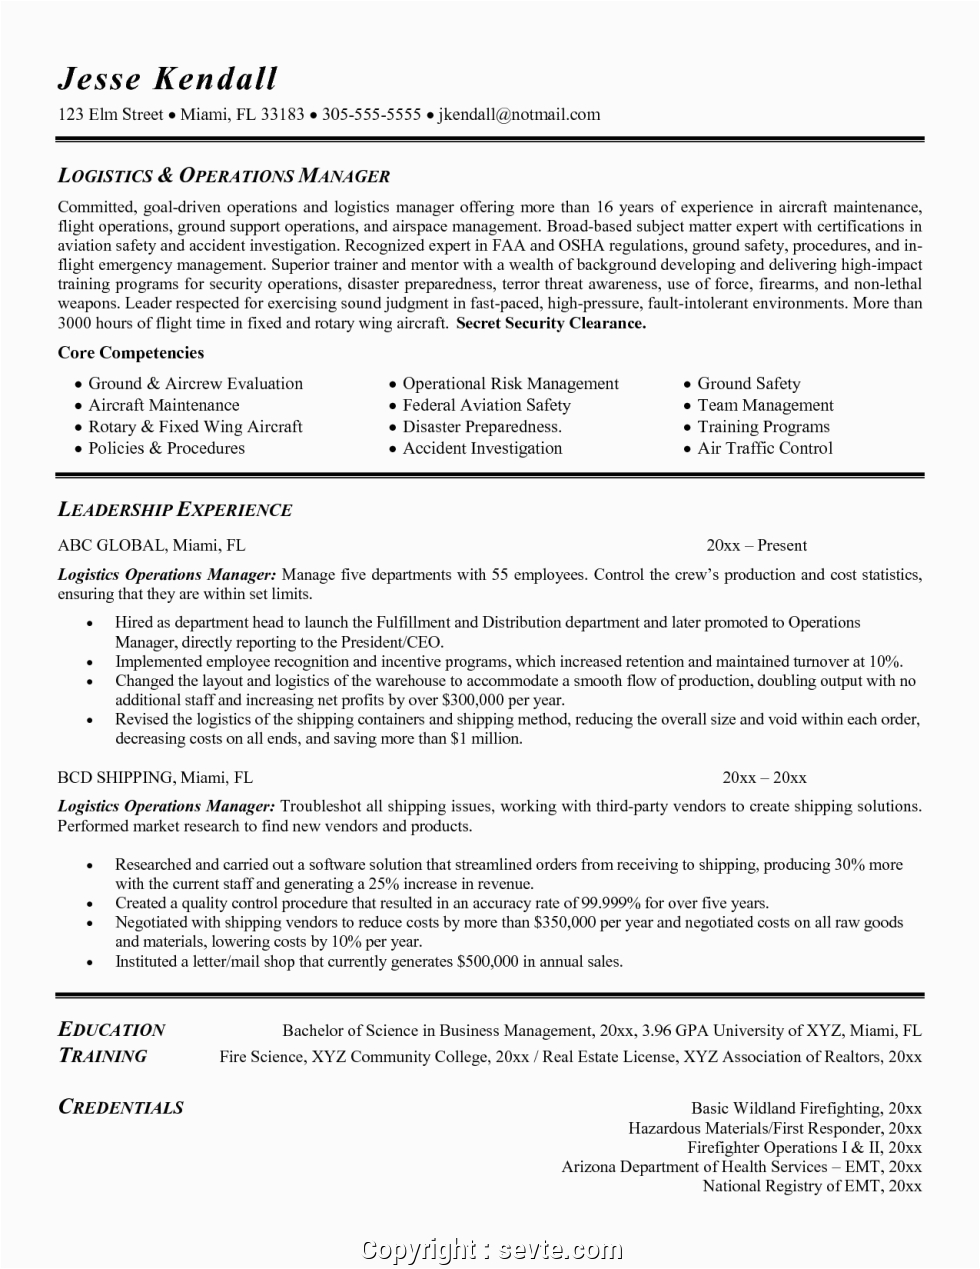 Sample Resume Of Logistics Supply Chain Manager Best Logistics Operations Manager Resume Example Logistics